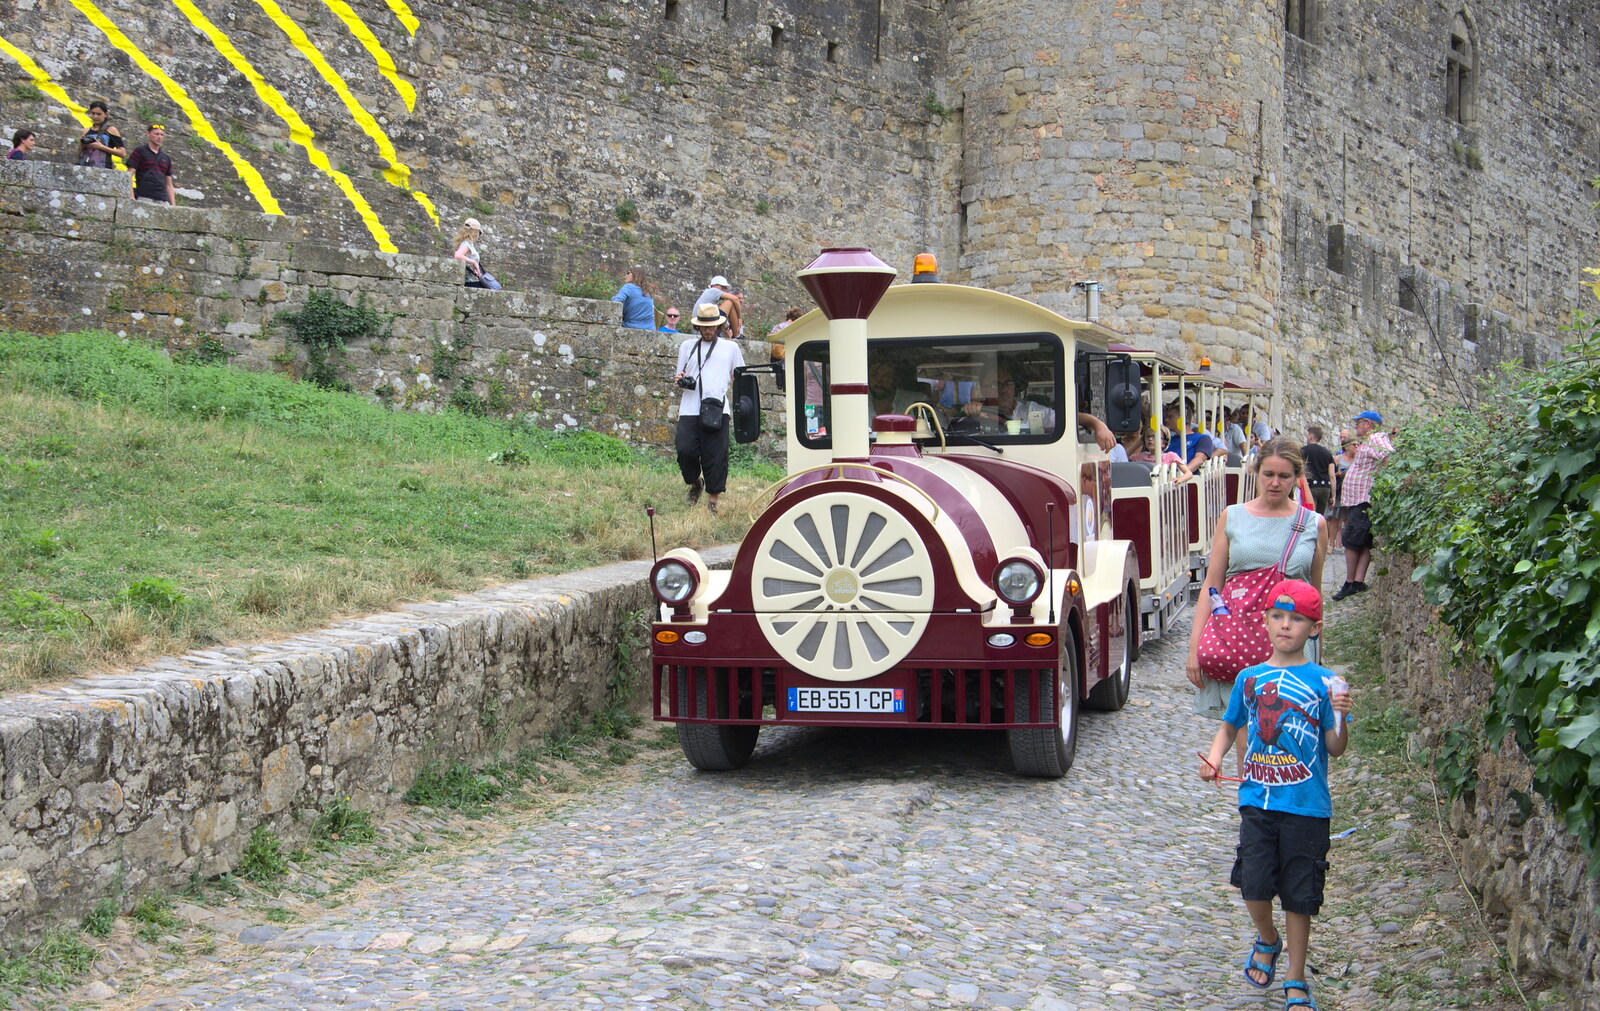 The tourist train passes us on the hill from The Château Comtal, Lastours and the Journey Home, Carcassonne, Aude, France - 14th August 2018